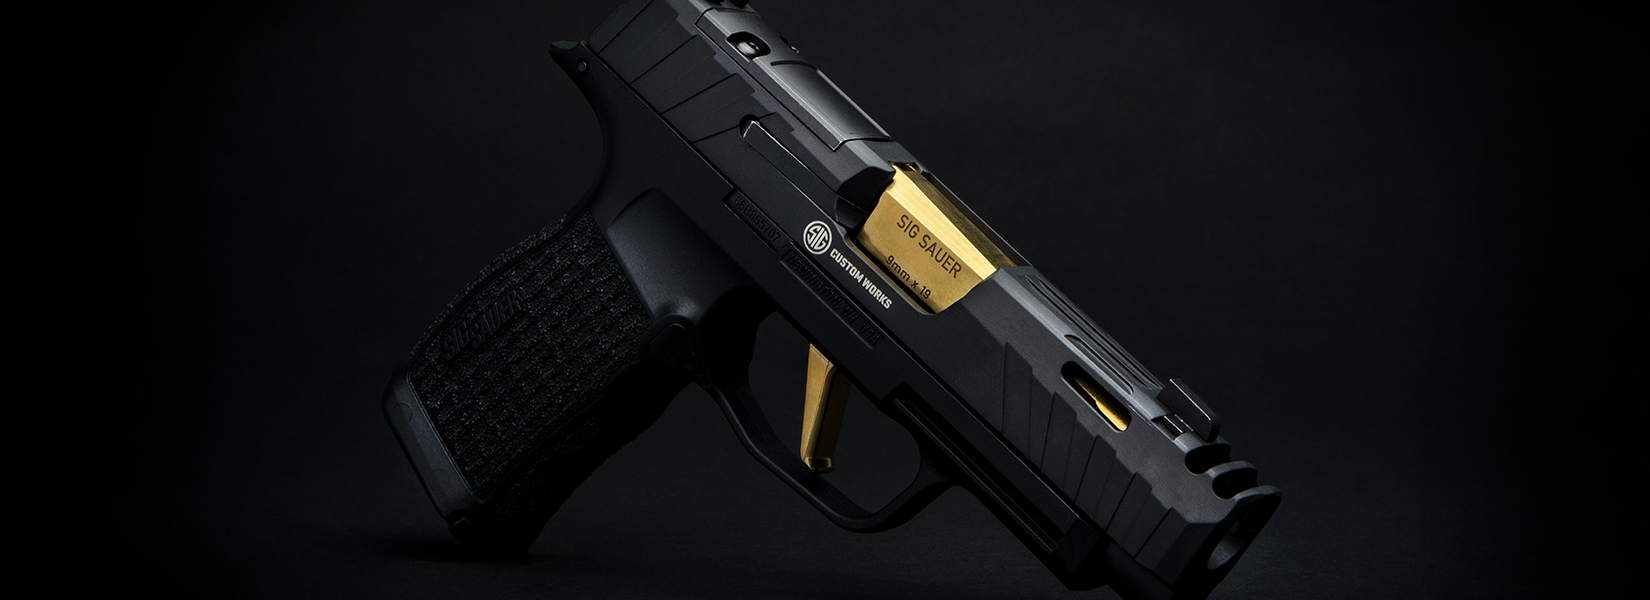 The P365 Family from Sig Sauer: Something for Everyone - Inside